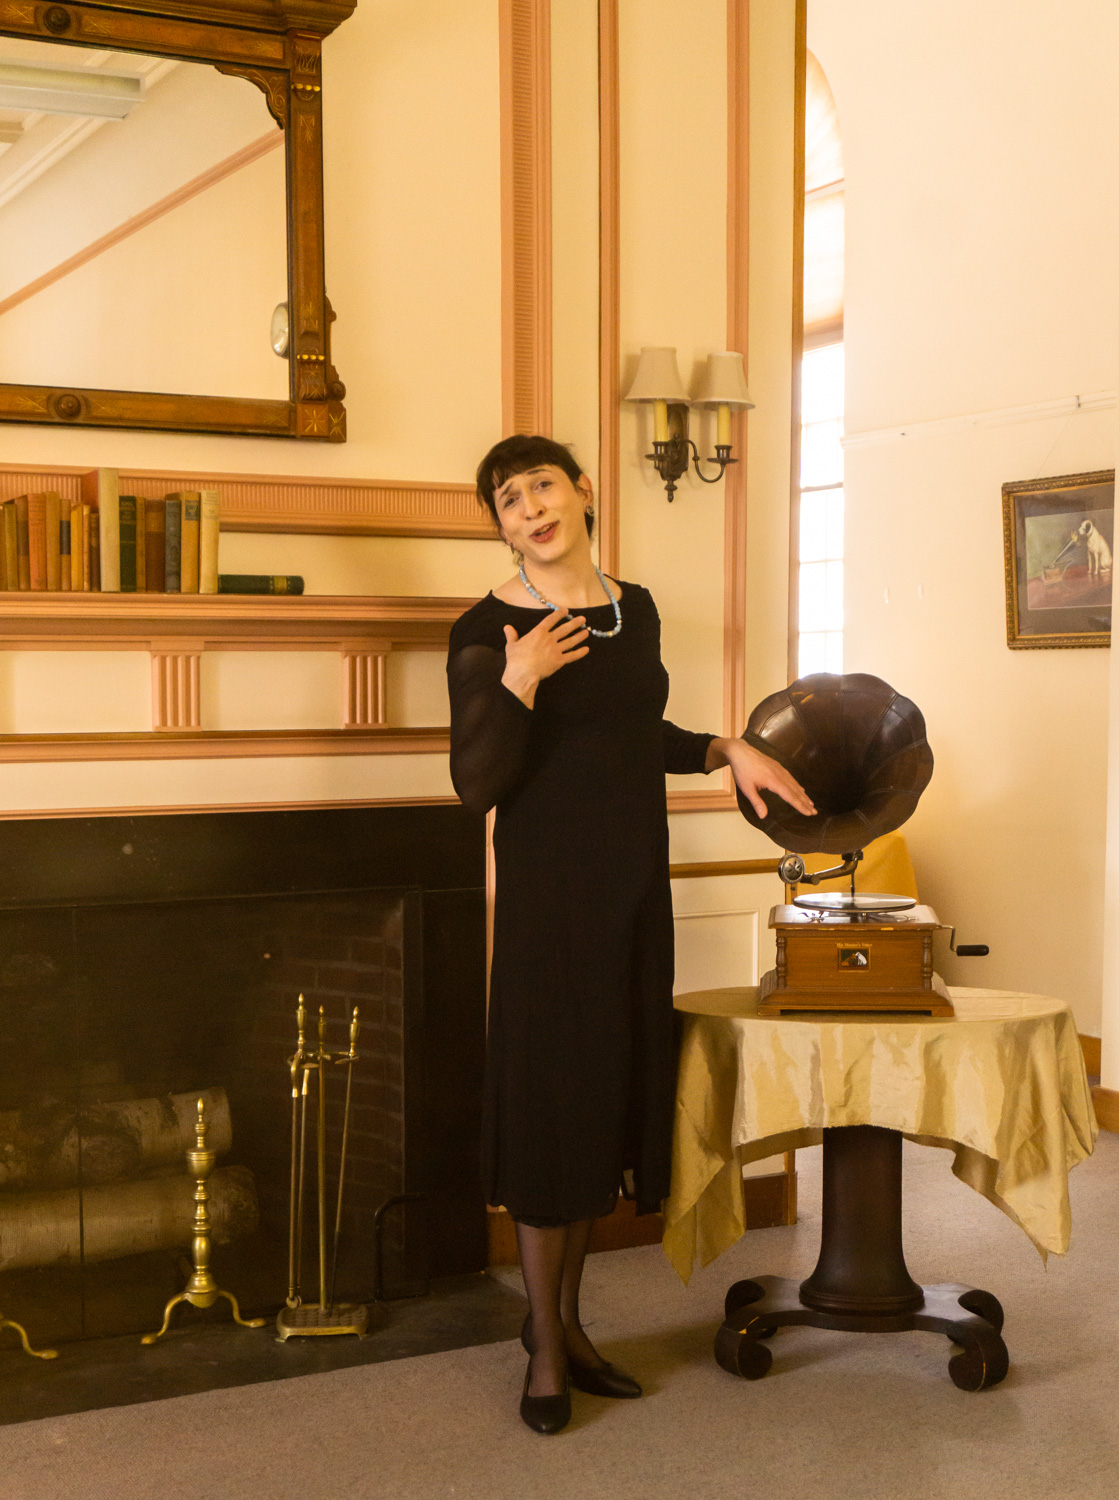 transwoman in black dress wearing blue pearl-like beads, in front of victorian fire place standing next to gramaphone